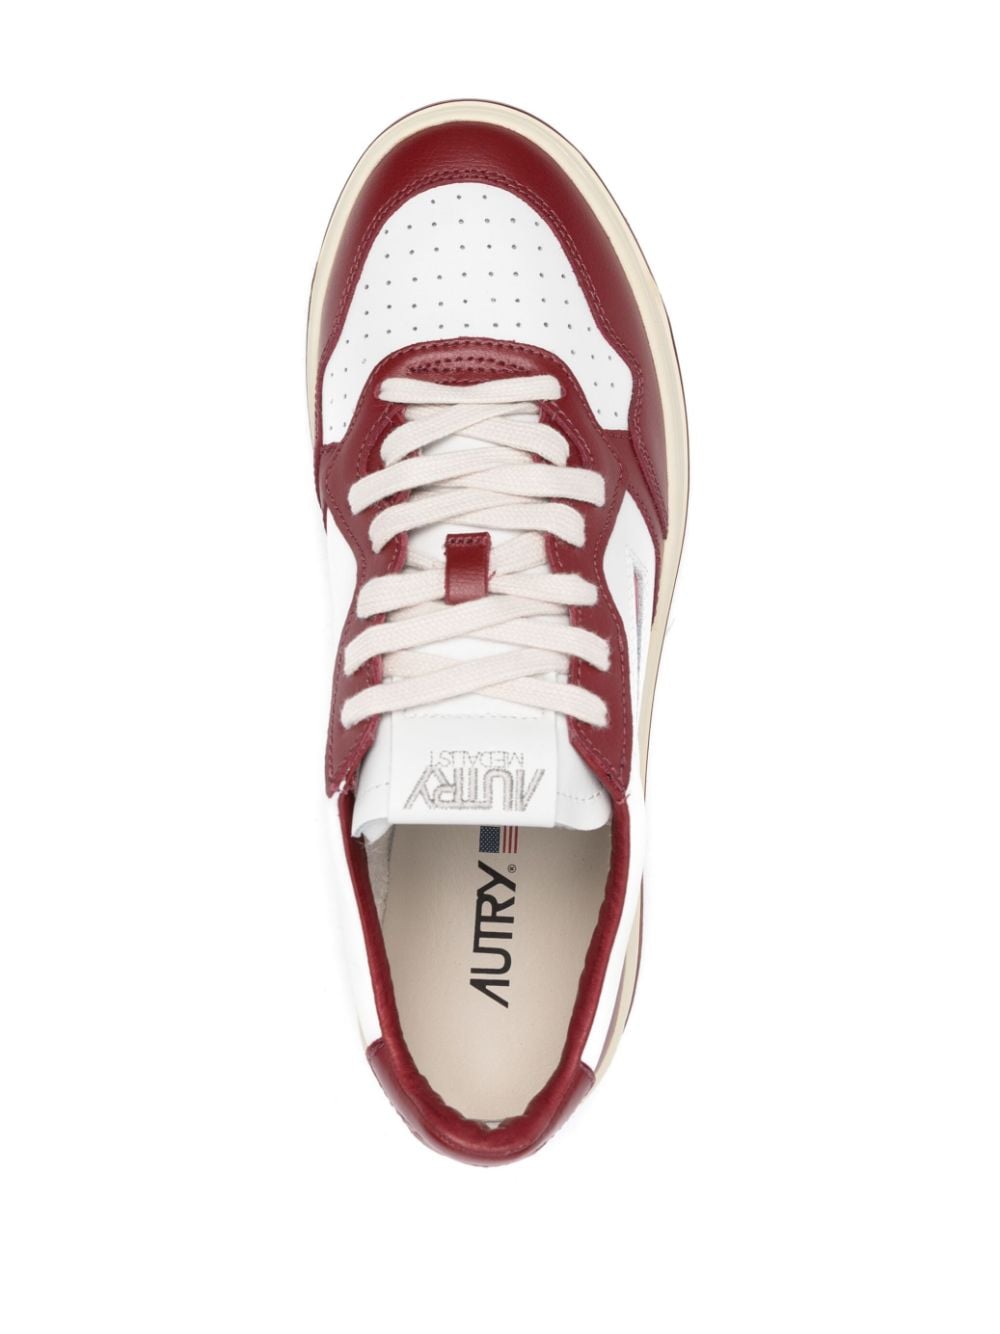 white and burgundy leather sneakers